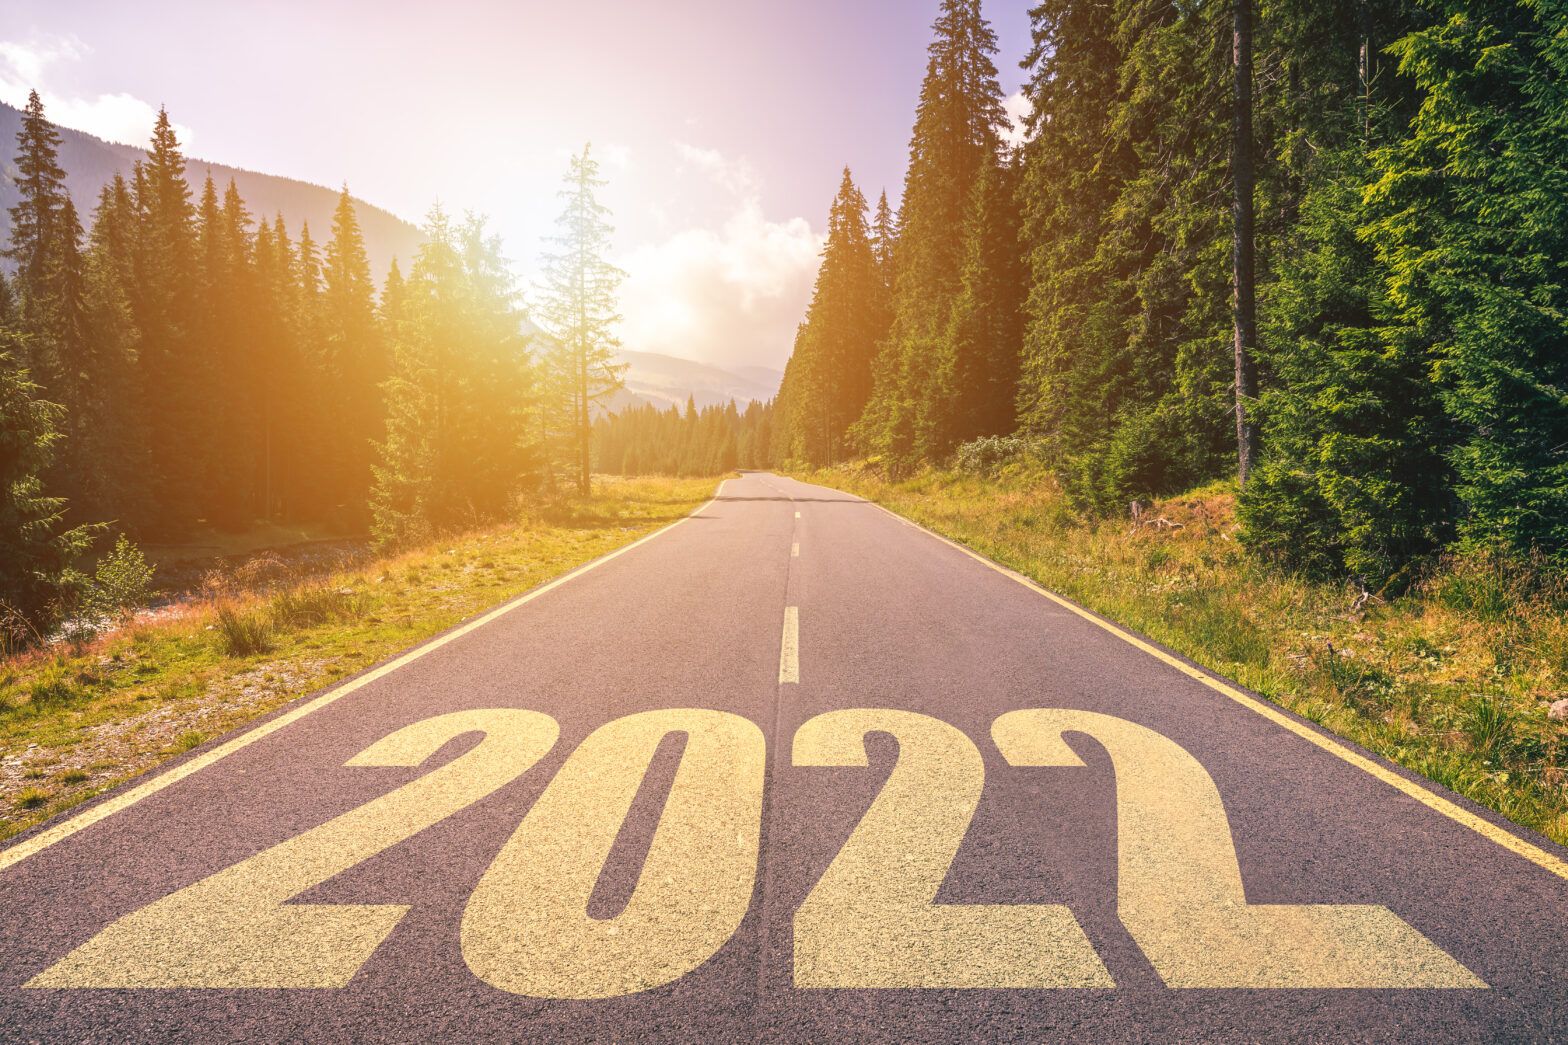 ESG regulation in 2022: ‘A watershed year’